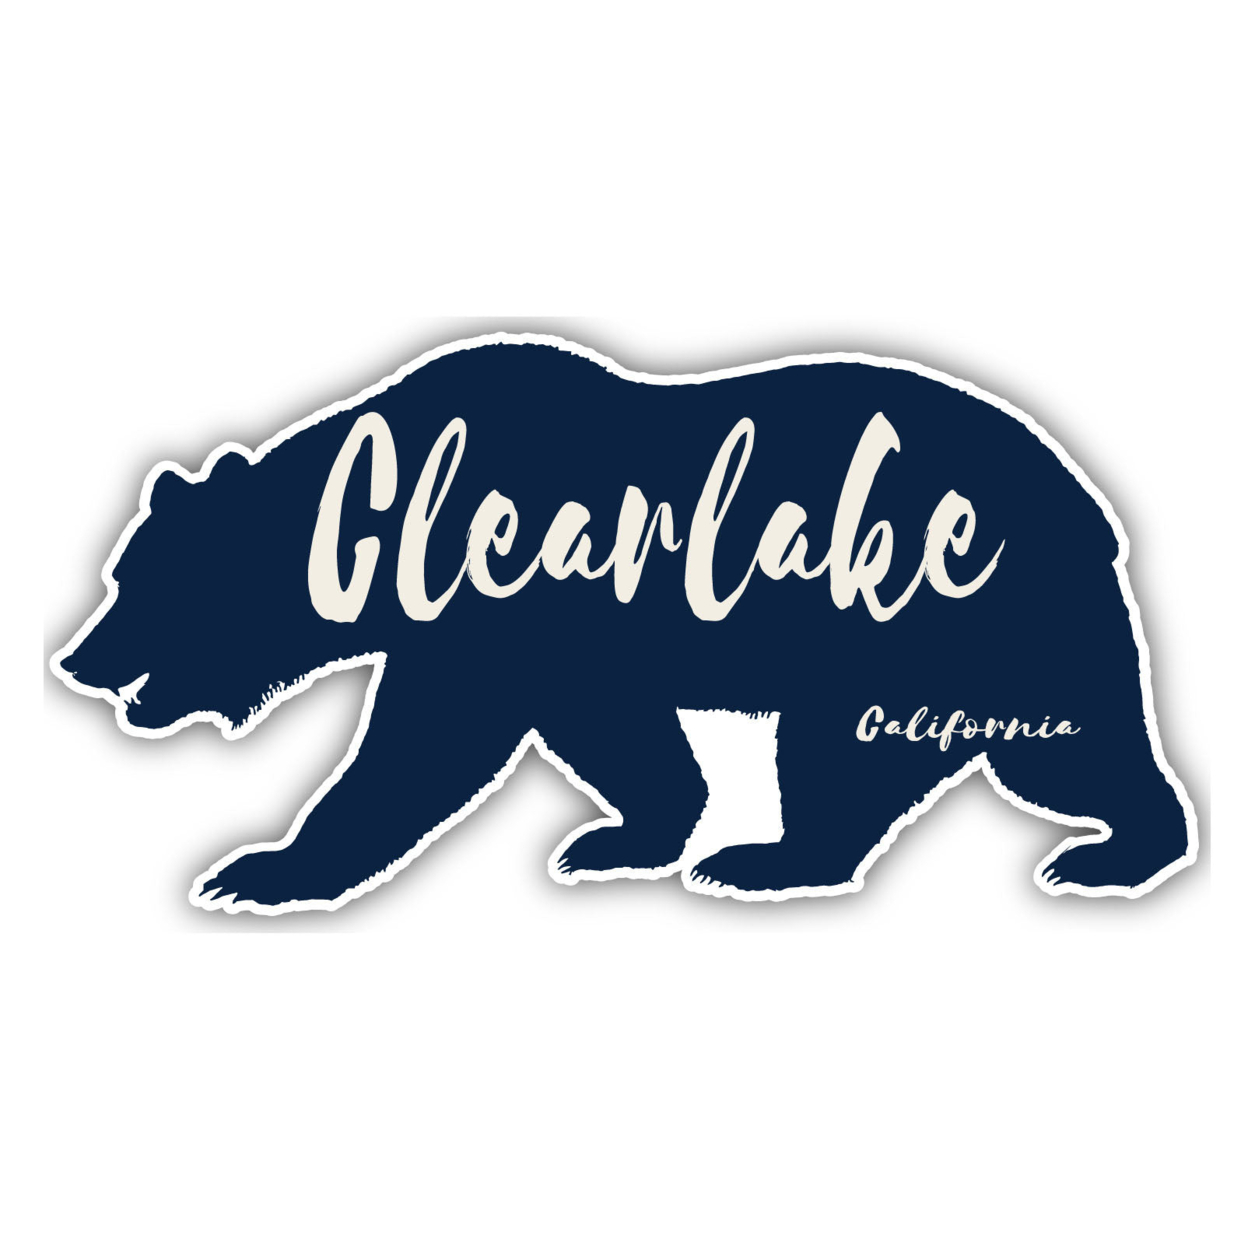 Clearlake California Souvenir Decorative Stickers (Choose Theme And Size) - 4-Pack, 12-Inch, Tent